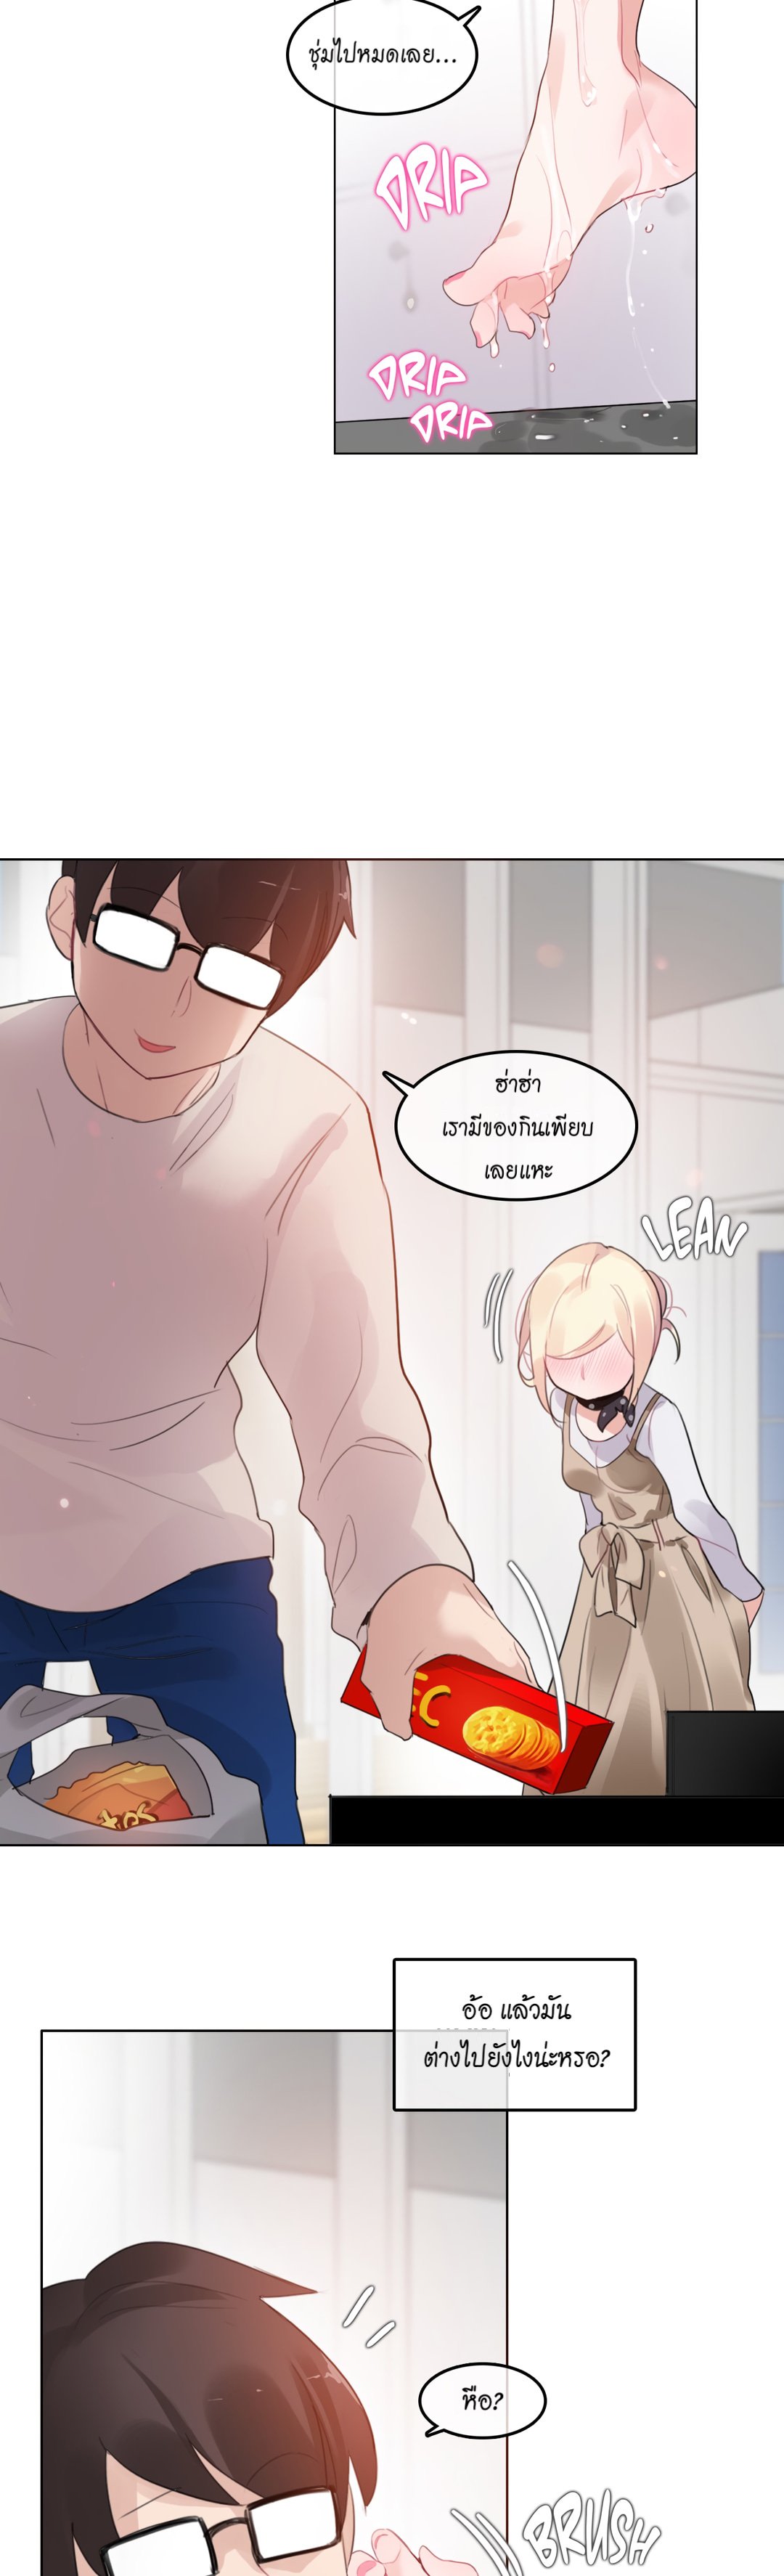 A Pervert’s Daily Life 56 16